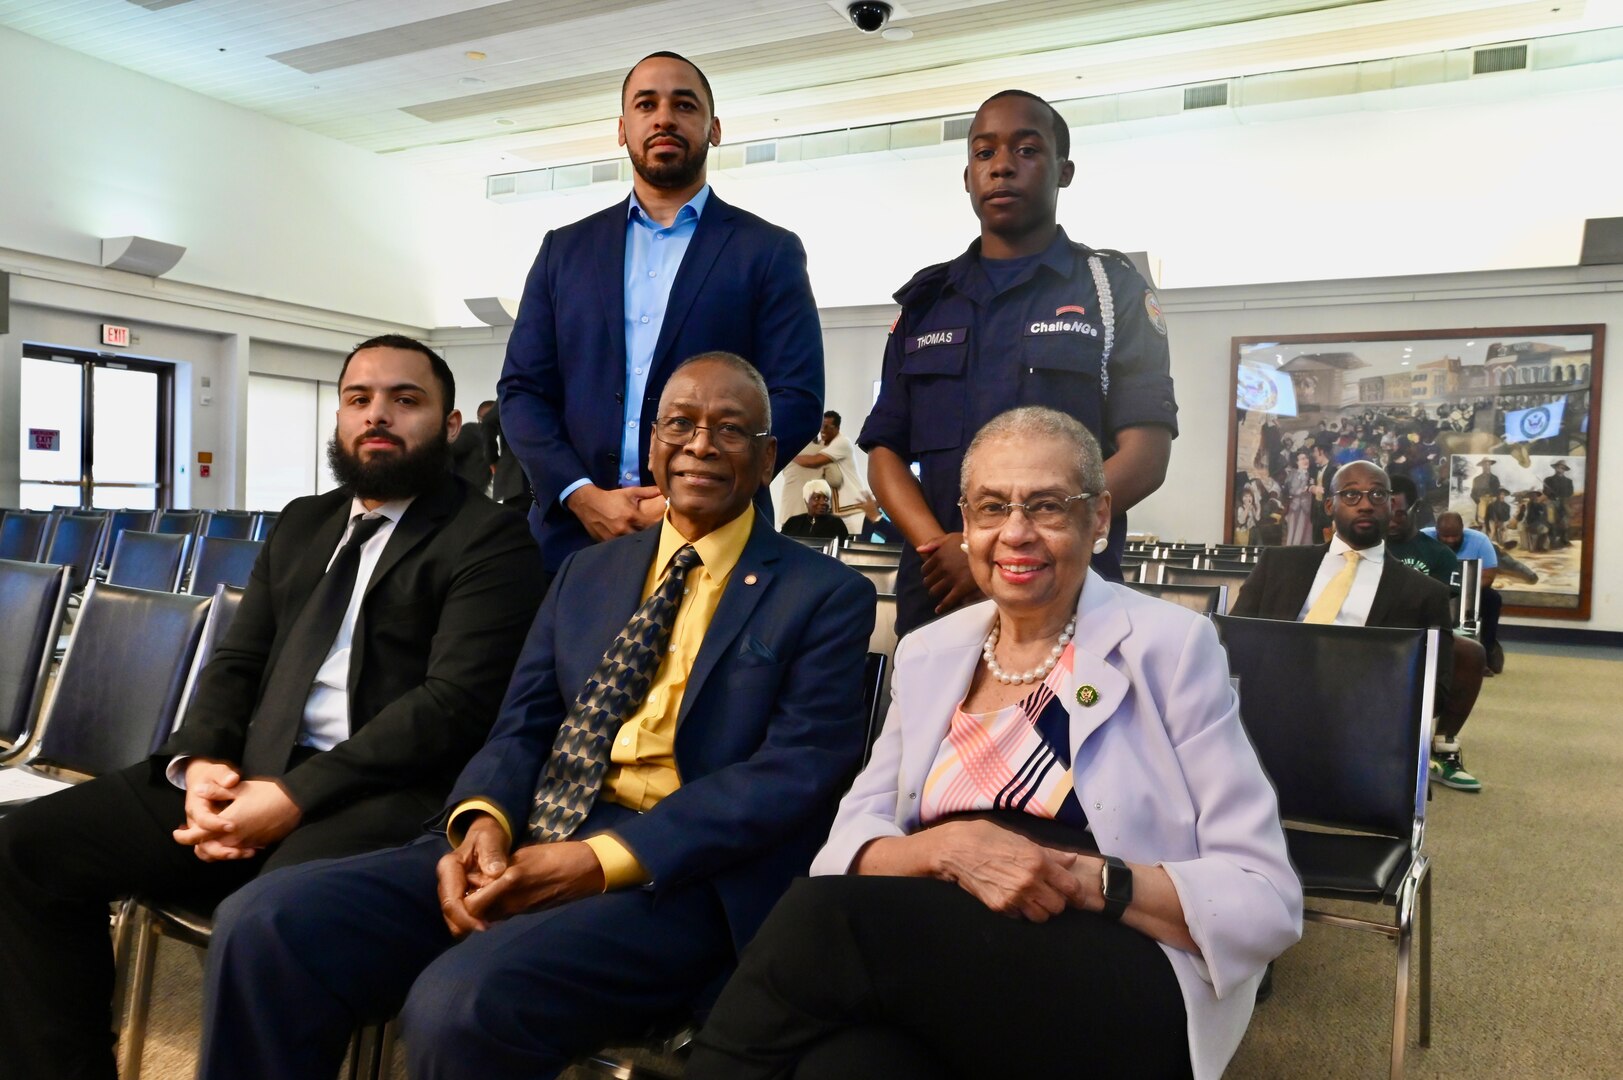 Representatives from the Capital Guardian Youth ChalleNGe Academy, D.C. Commission on Black Men and Boys, and Rep. Eleanor Holmes Norton are photographed prior to a meeting in Washington, D.C, April 30, 2024. The commission seeks solutions to disparities affecting Black men and boys in the District to include social conditions, crime and incarceration rates.